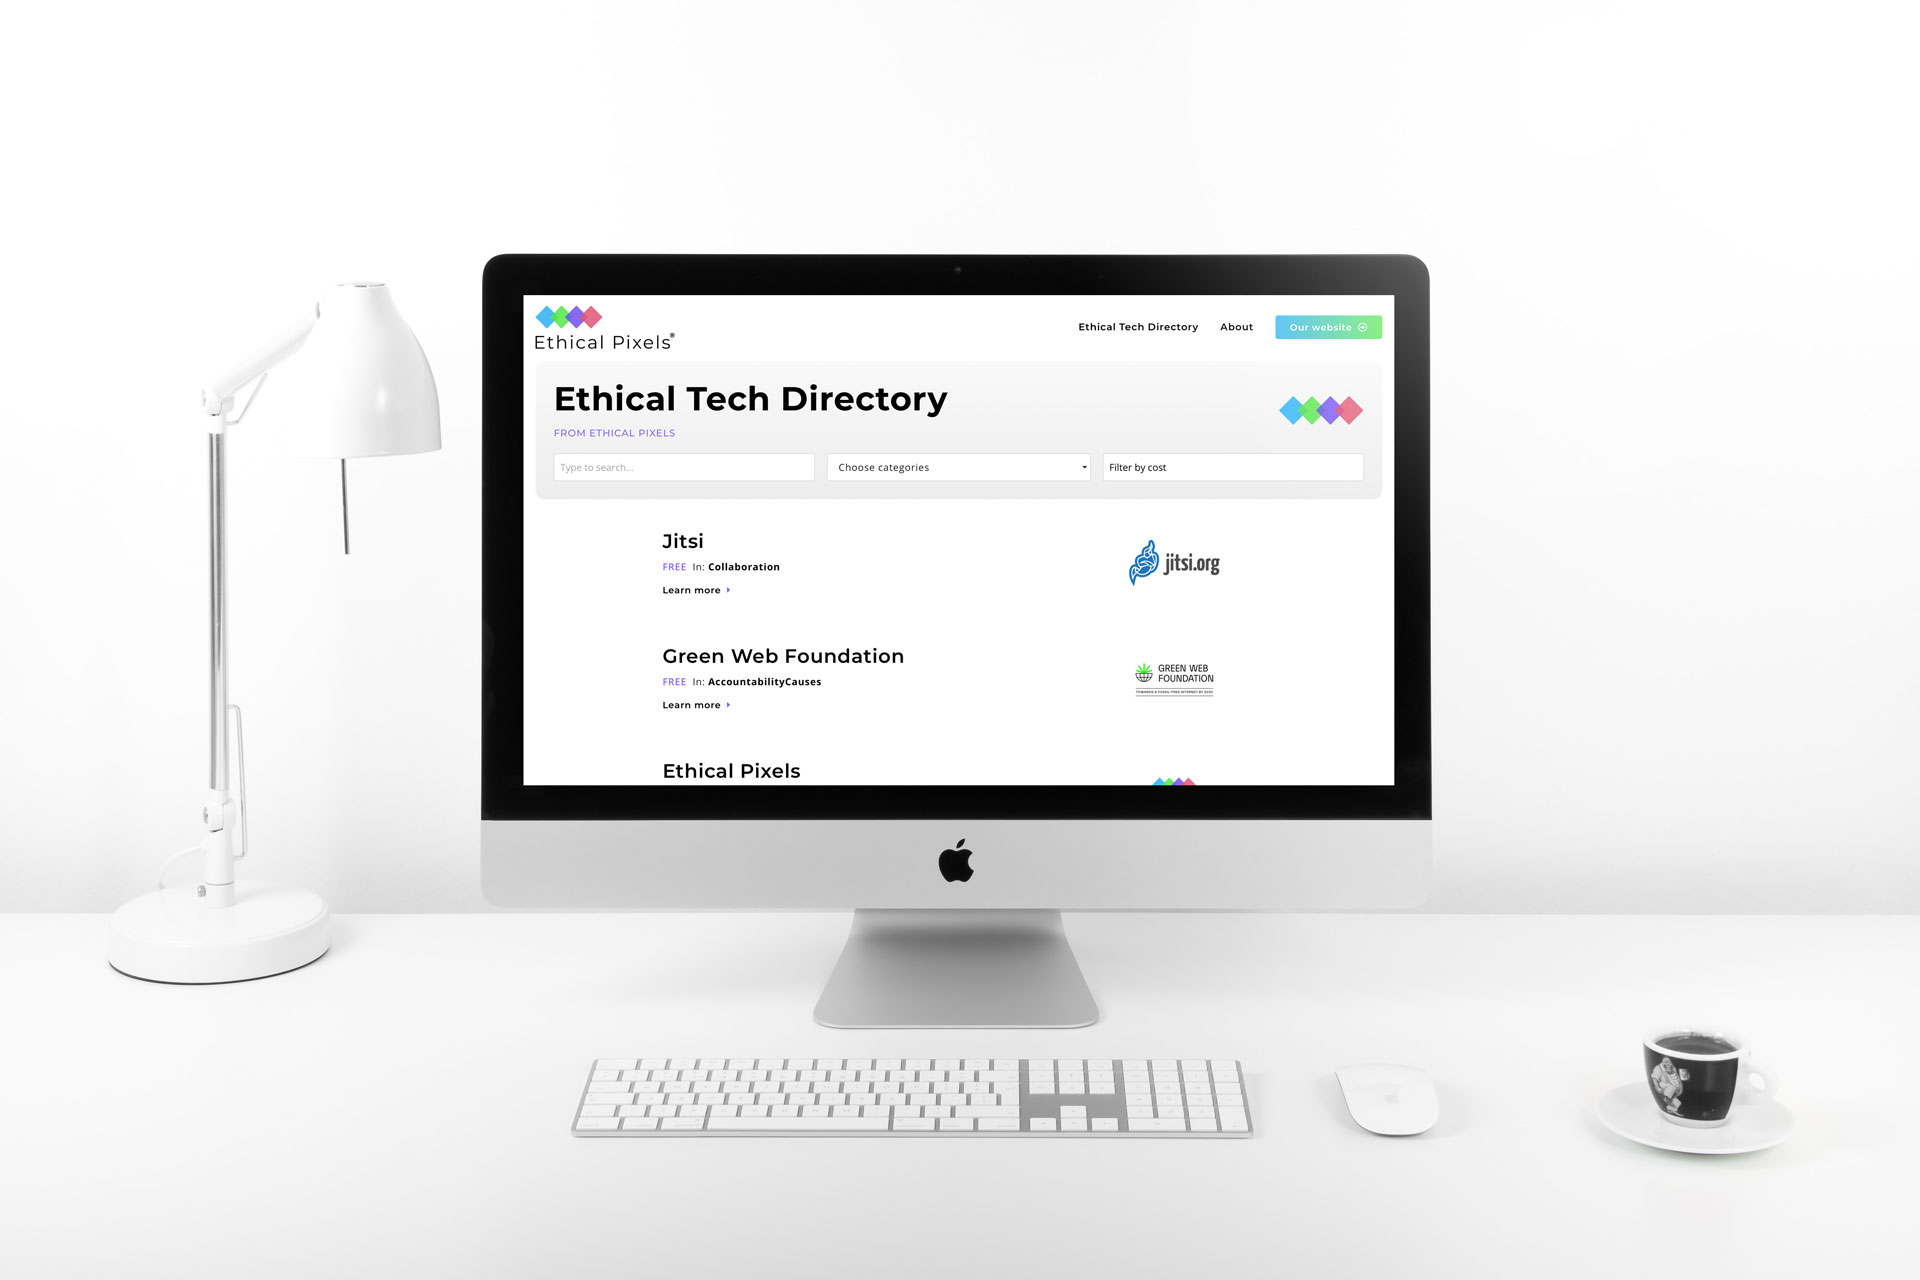 The Ethical Tech Directory from Ethical Pixels is a great resource to evaluate technology choices for your website.